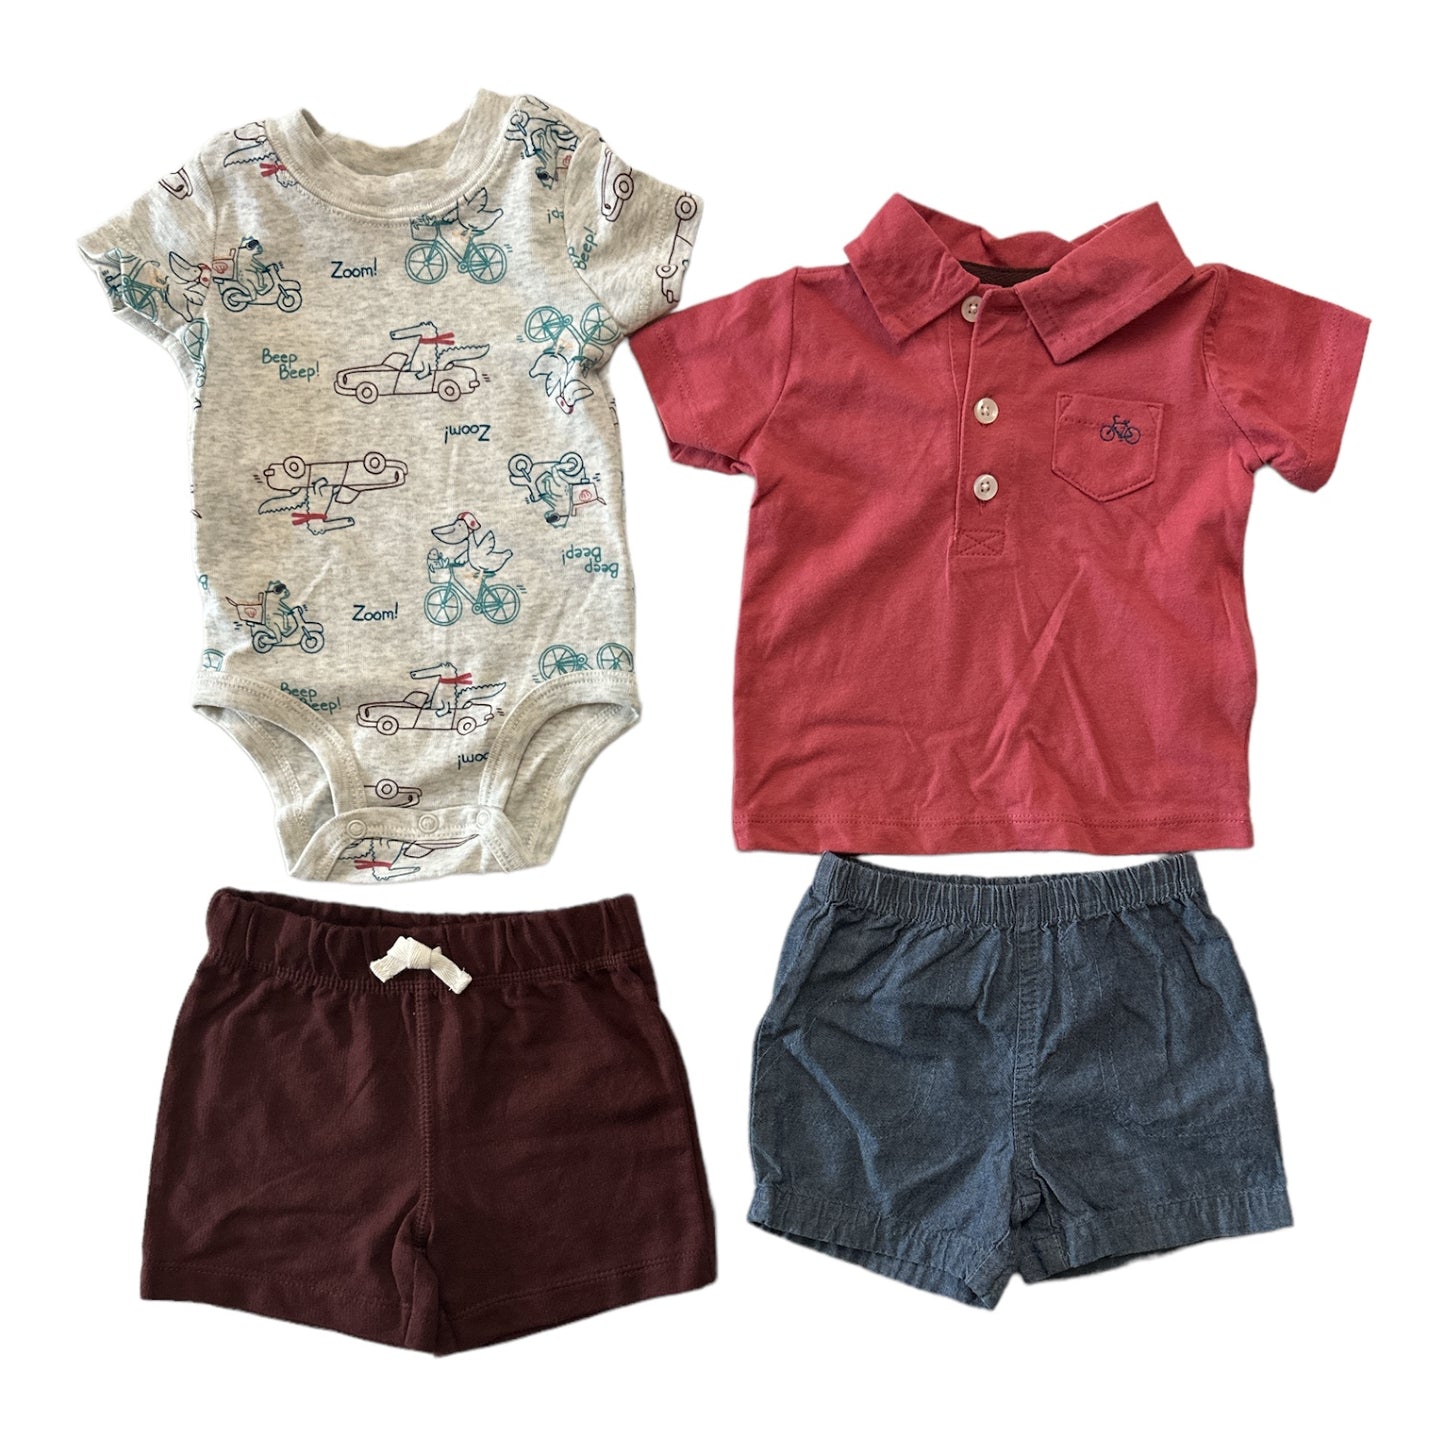 Carter's Baby Boy's 4 Piece Short Sleeve Shirts & Shorts Outfit Sets